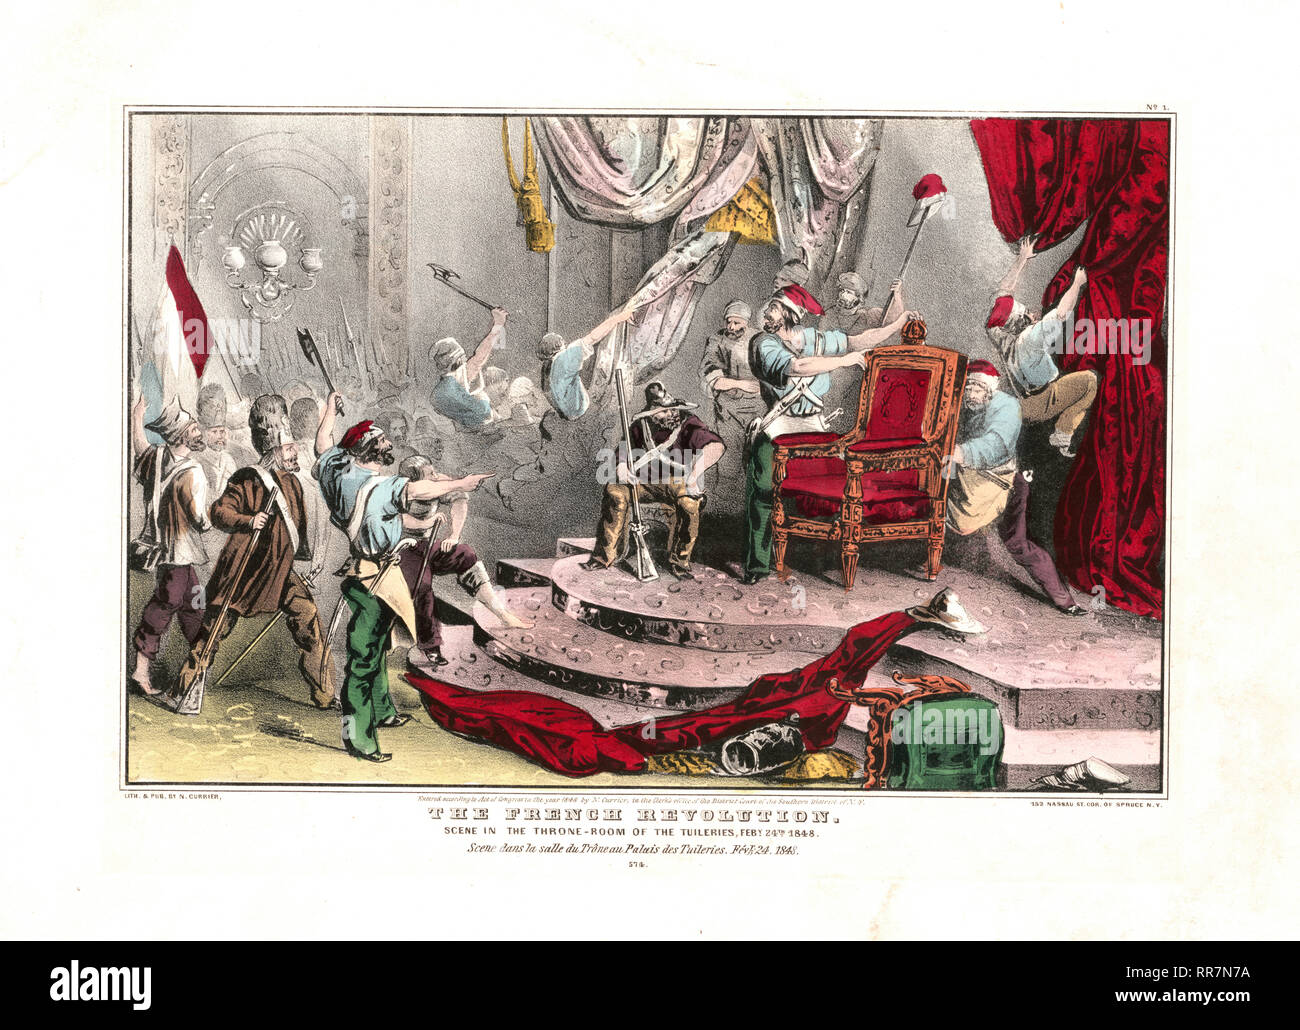 1851 Vintage Illustration Engraving The Duchess of Orleans at Chamber of Deputies 1848 French Revolution 8 3/4 x 5 1/2 Historical Interest